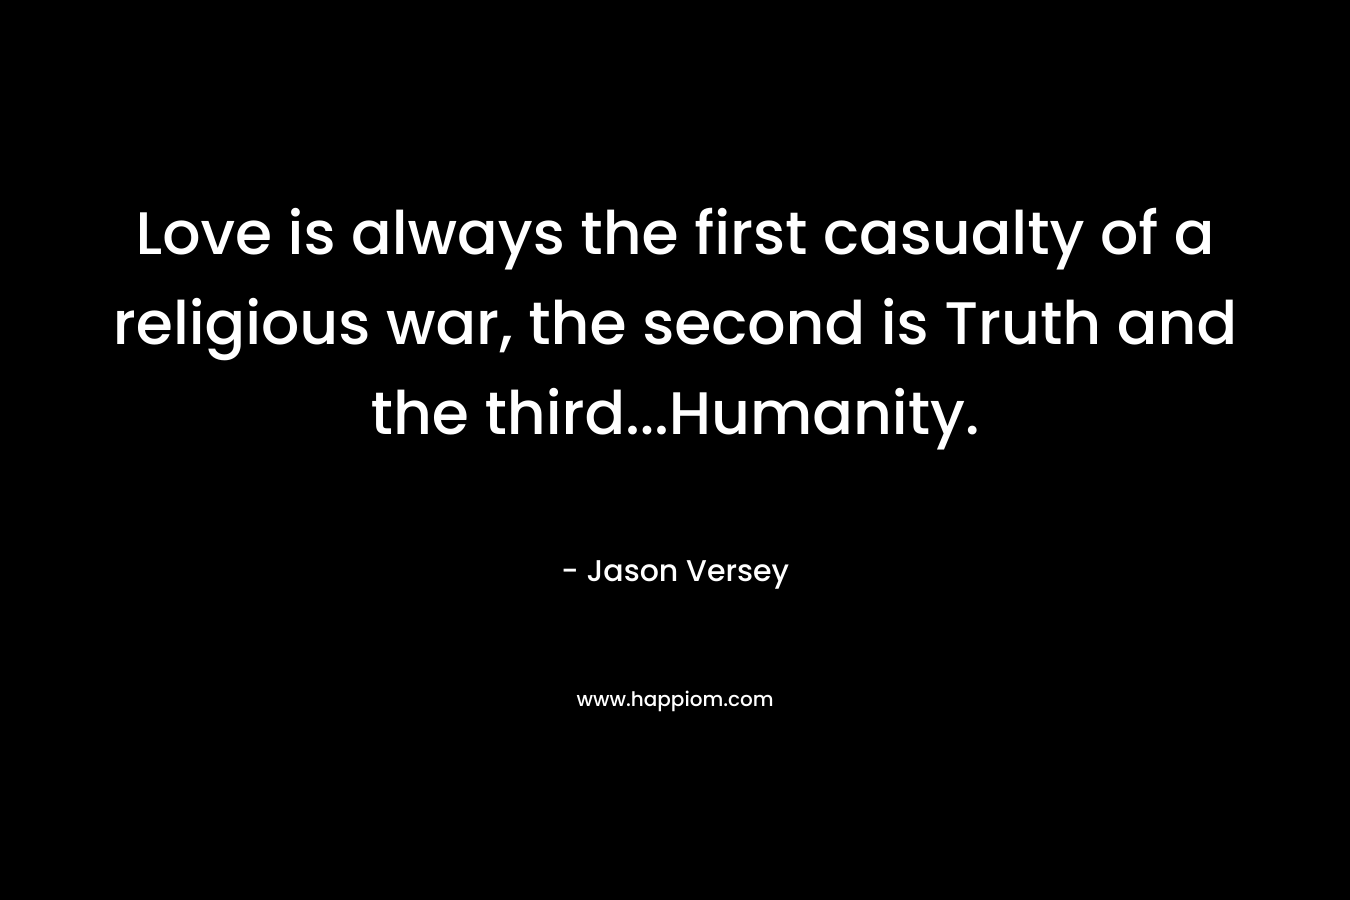 Love is always the first casualty of a religious war, the second is Truth and the third…Humanity. – Jason Versey